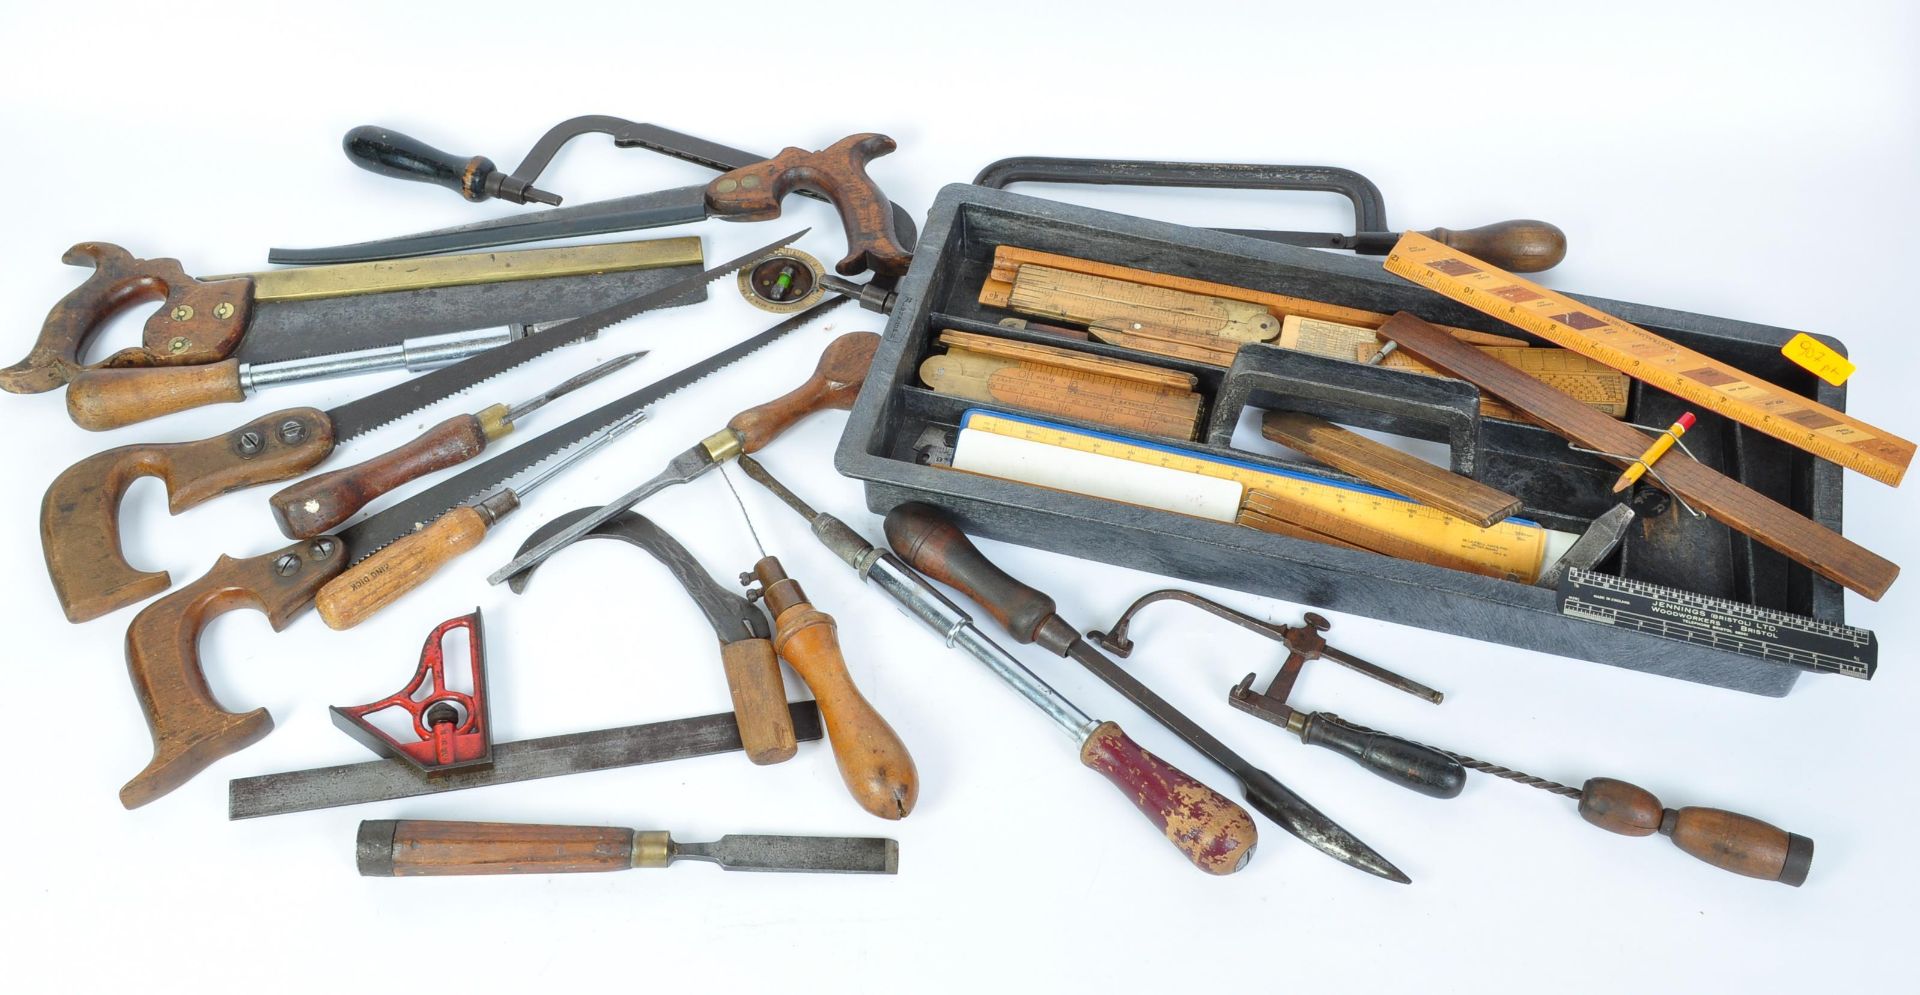 A LARGE COLLECTION OF EARLY 20TH CENTURY & LATER WOODWORKING TOOLS